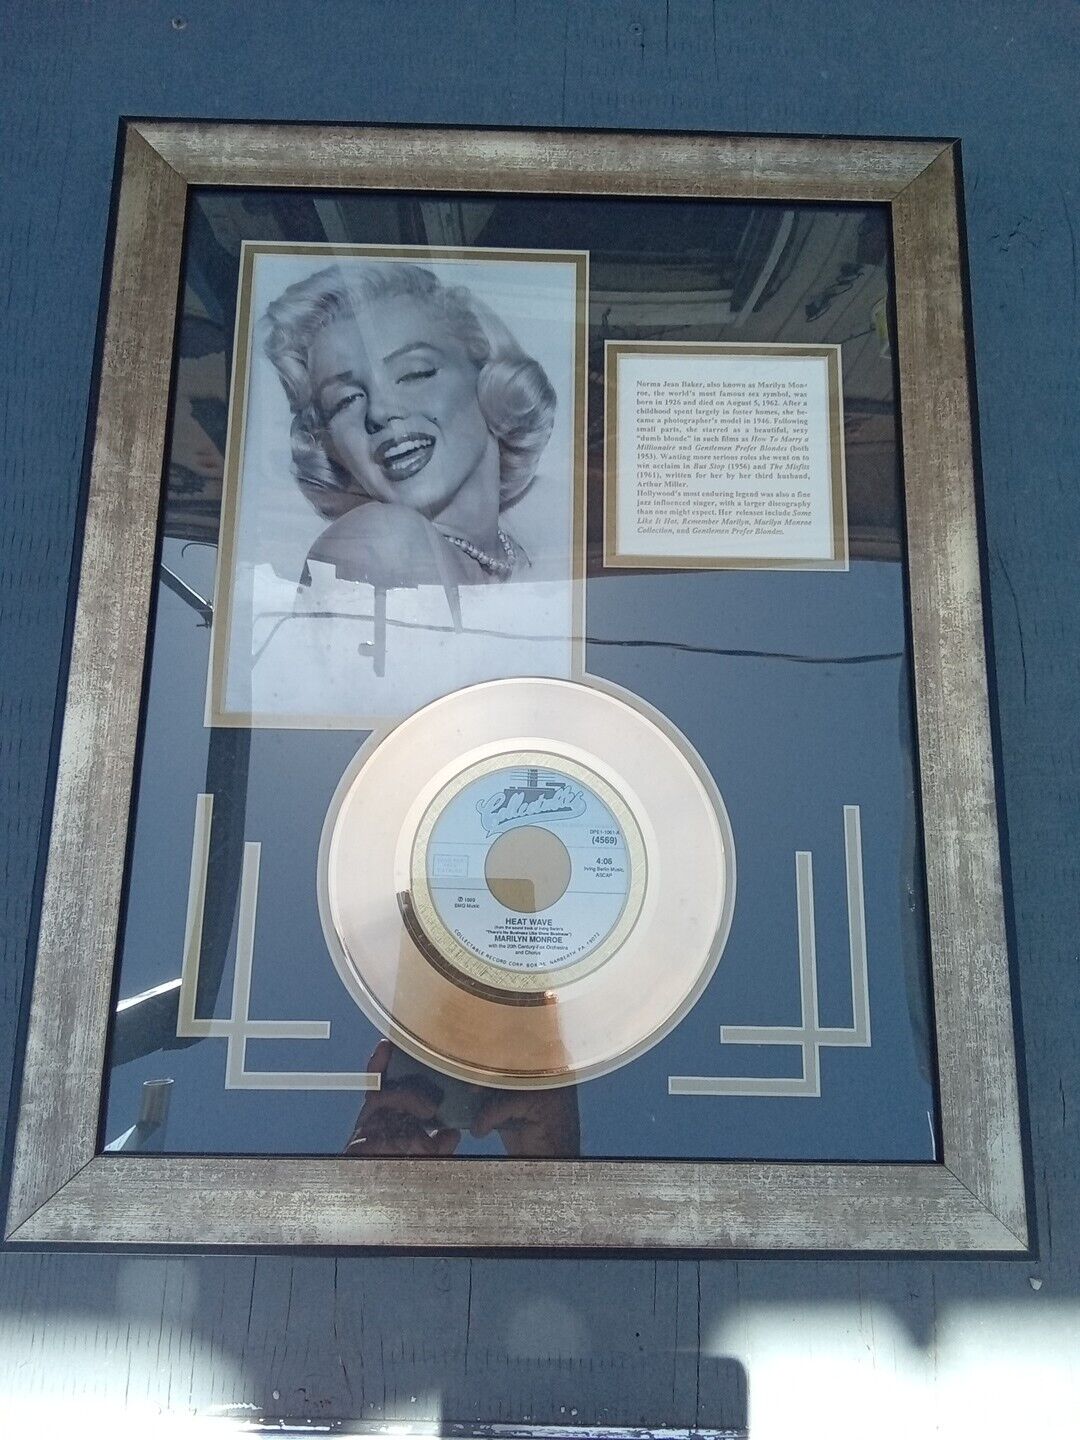 Marilyn Monroe 6x9 Photo With Gold Heat Wave Record In Frame